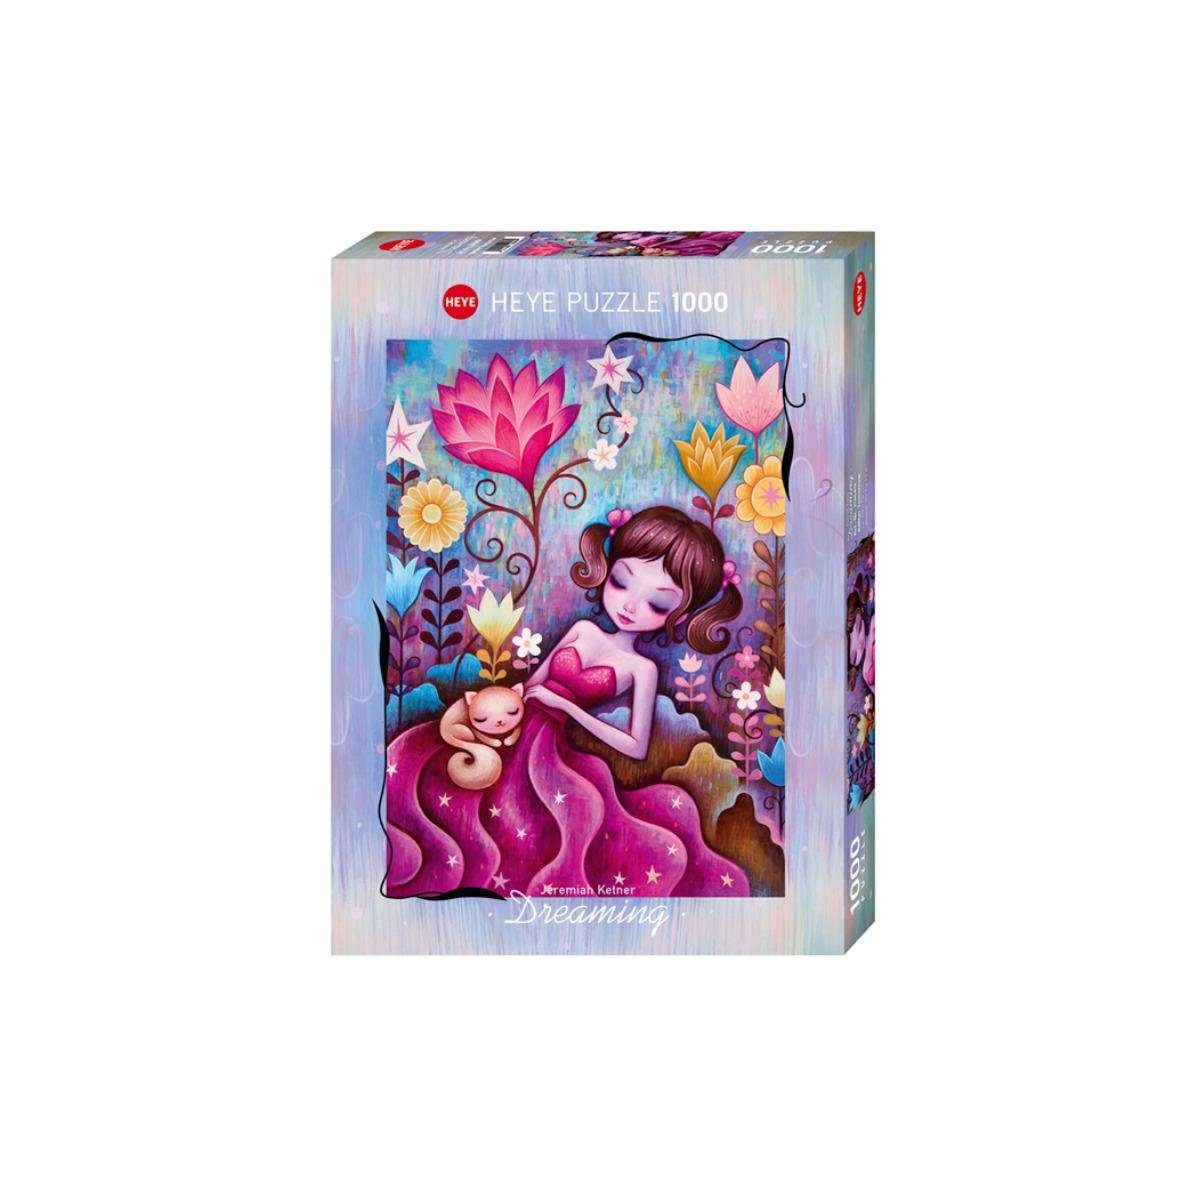 HEYE Puzzle 298494 - Better Tomorrow, Dreaming, 1000 Teile -..., 1000 Puzzleteile